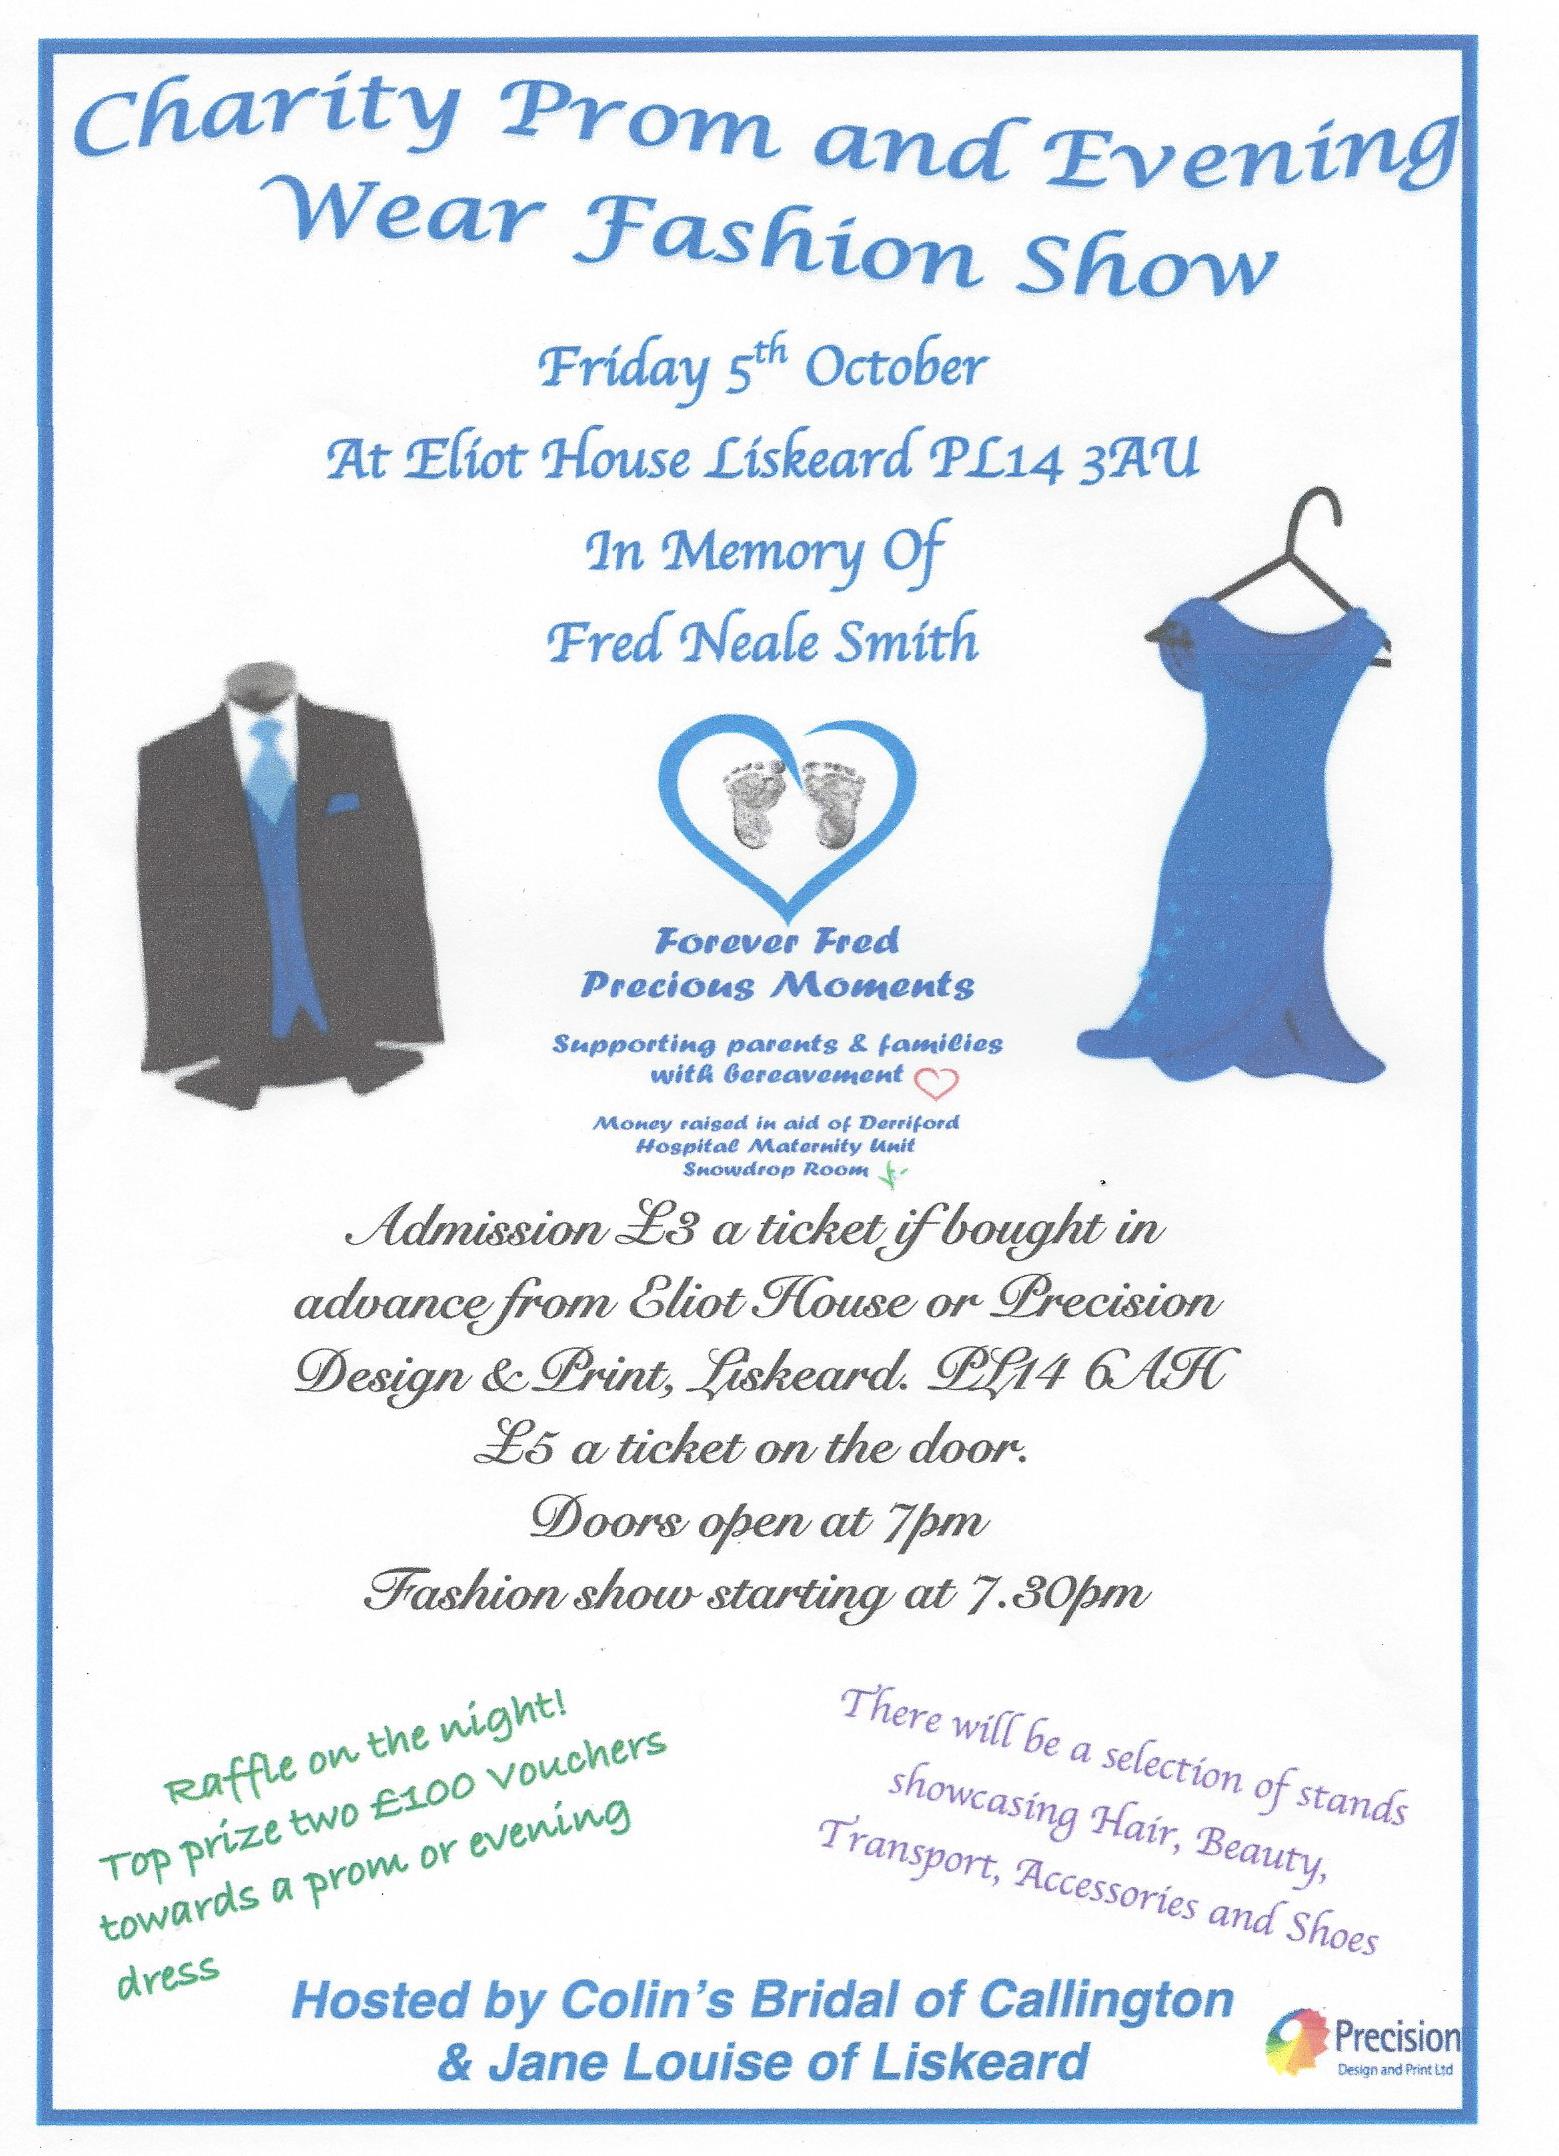 Charity Prom and Evening Wear Fashion Show - liskeard-visit 18